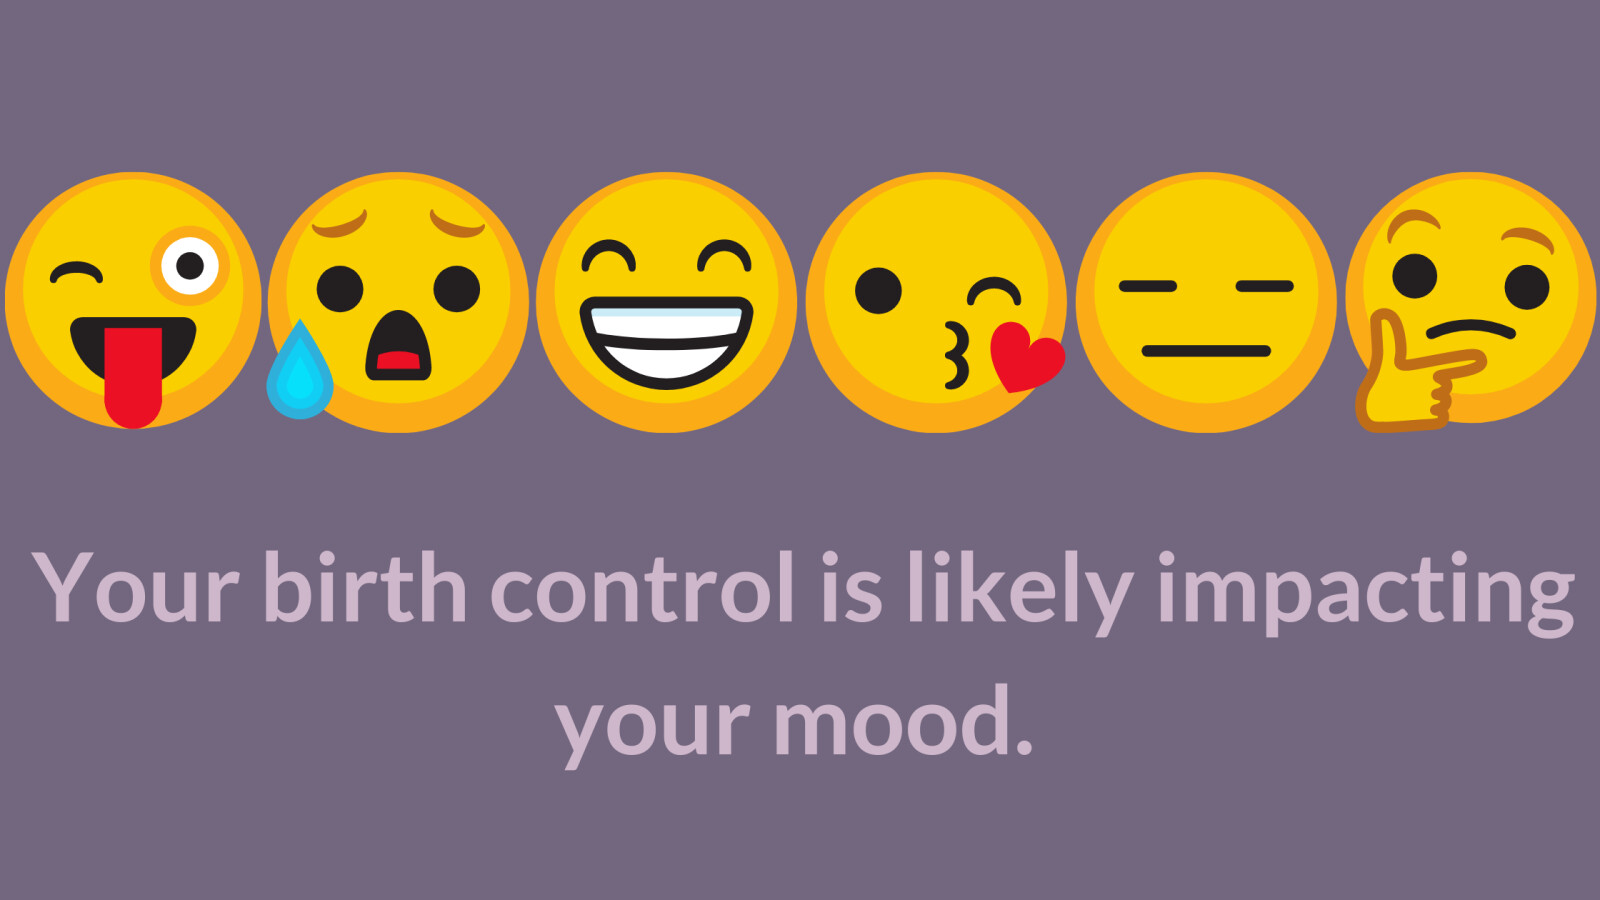 Birth Control and Mood Connection